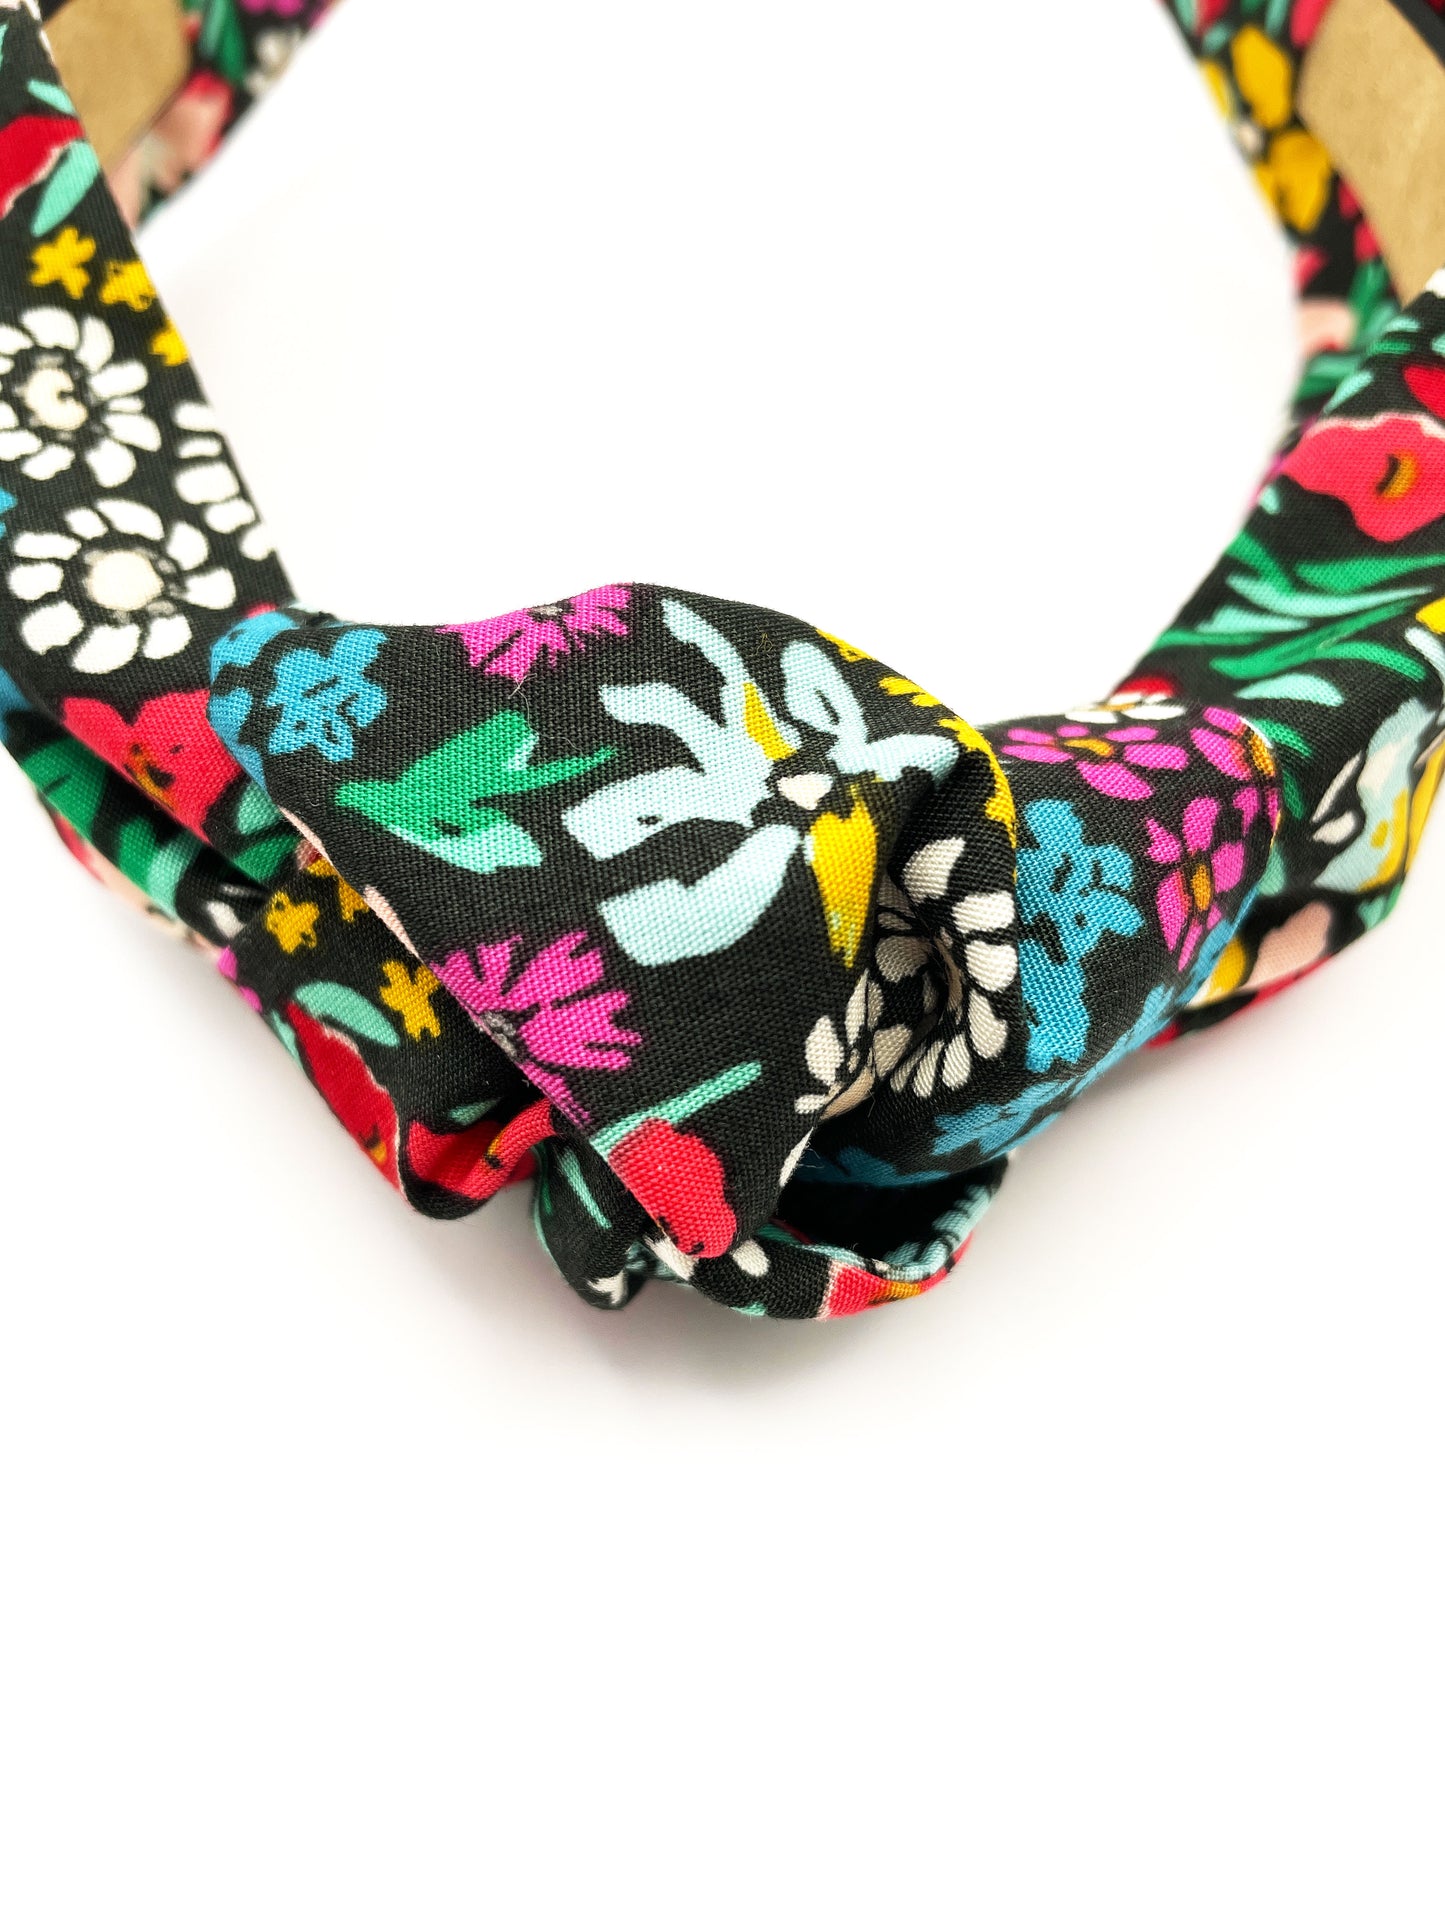 A black handmade knotted headband with a colorful floral print.